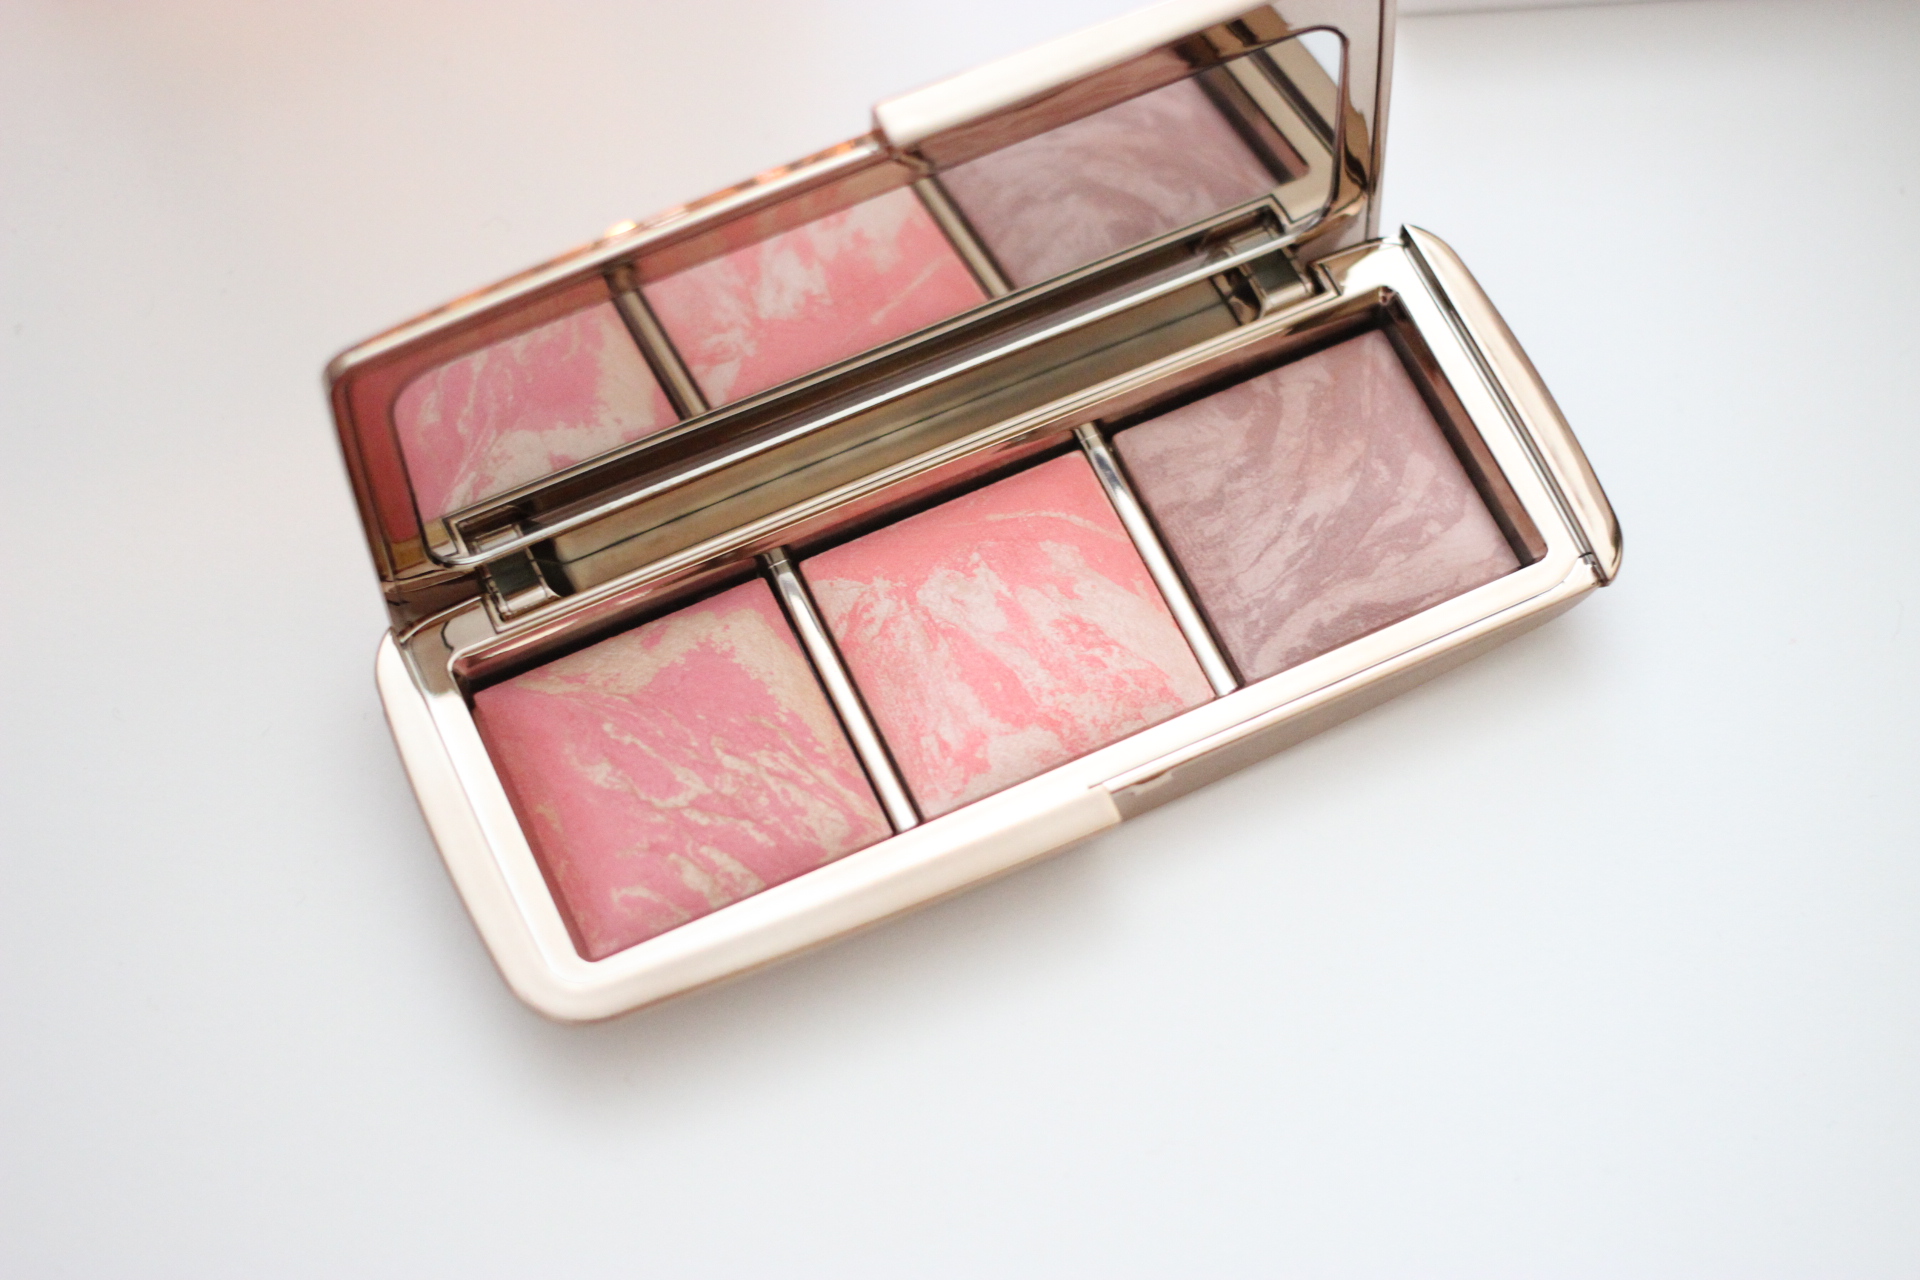 Hourglass Ambient Blush swatches